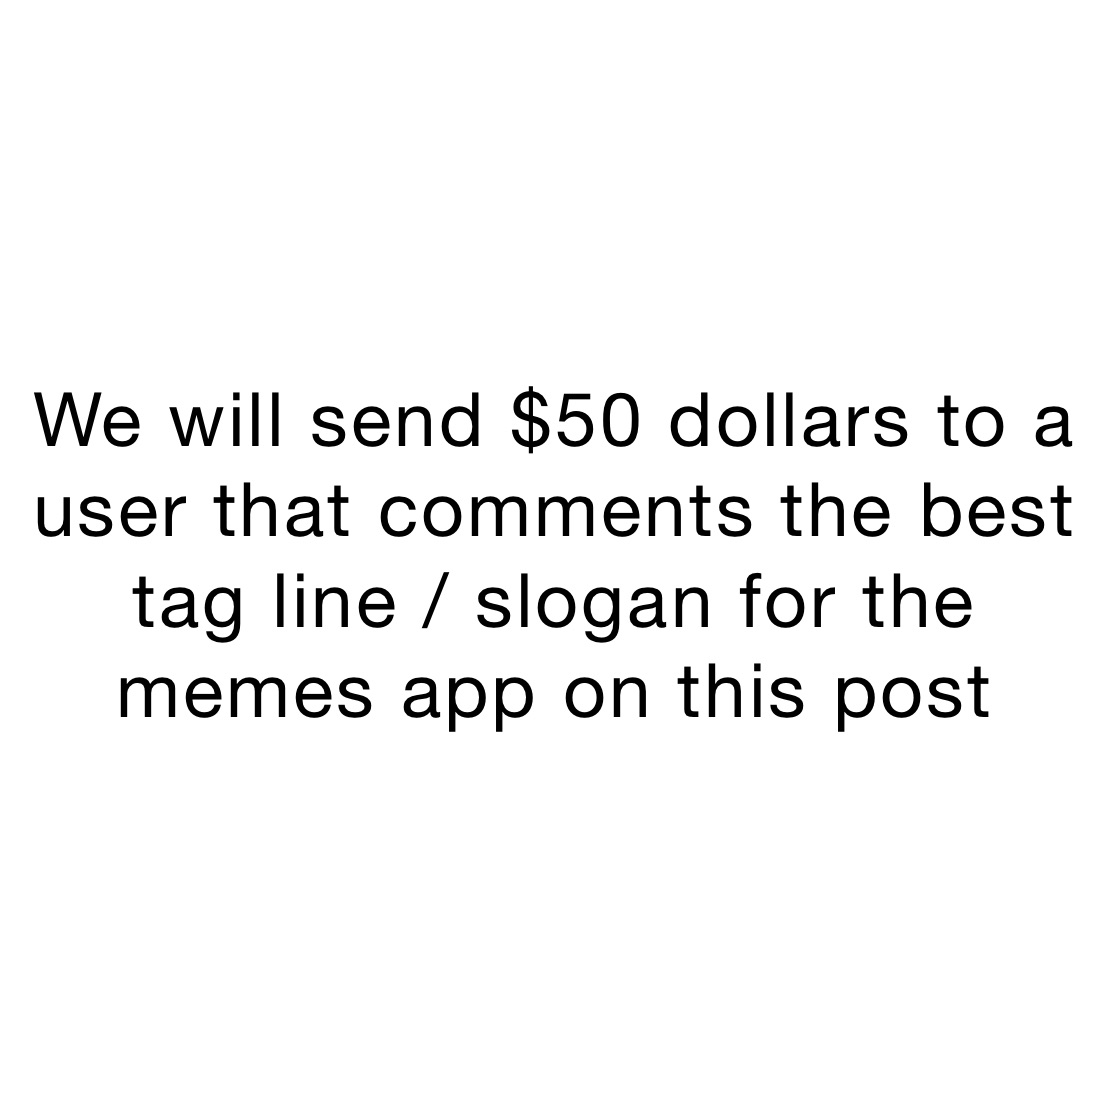 We will send $50 dollars to a user that comments the best tag line / slogan for the memes app on this post